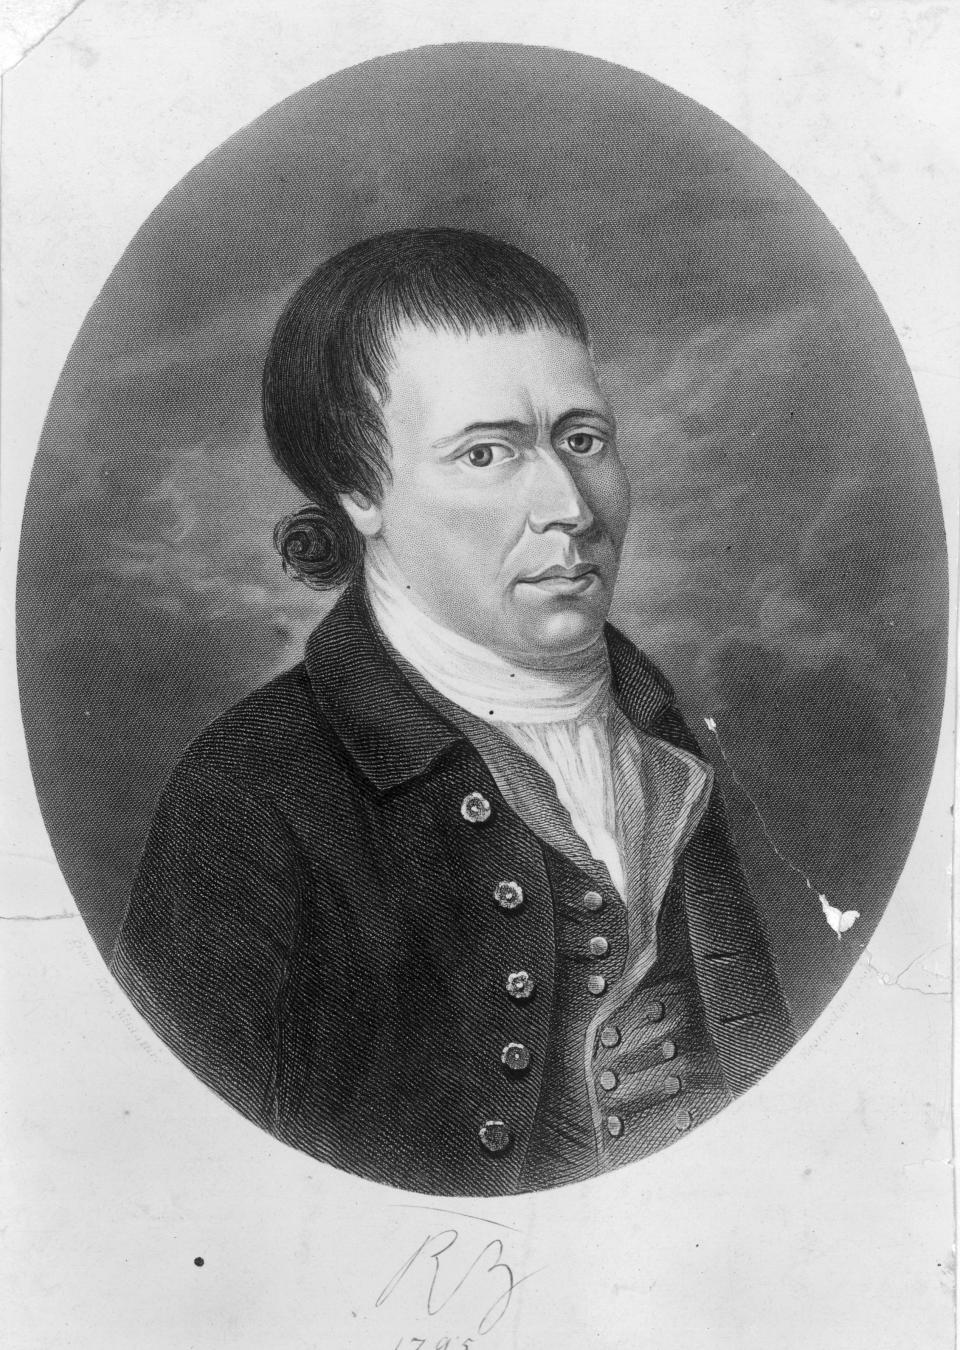 circa 1795: Scottish poet and writer of traditional Scottish folk songs Robert Burns (1759 - 1796). (Photo by Hulton Archive/Getty Images)